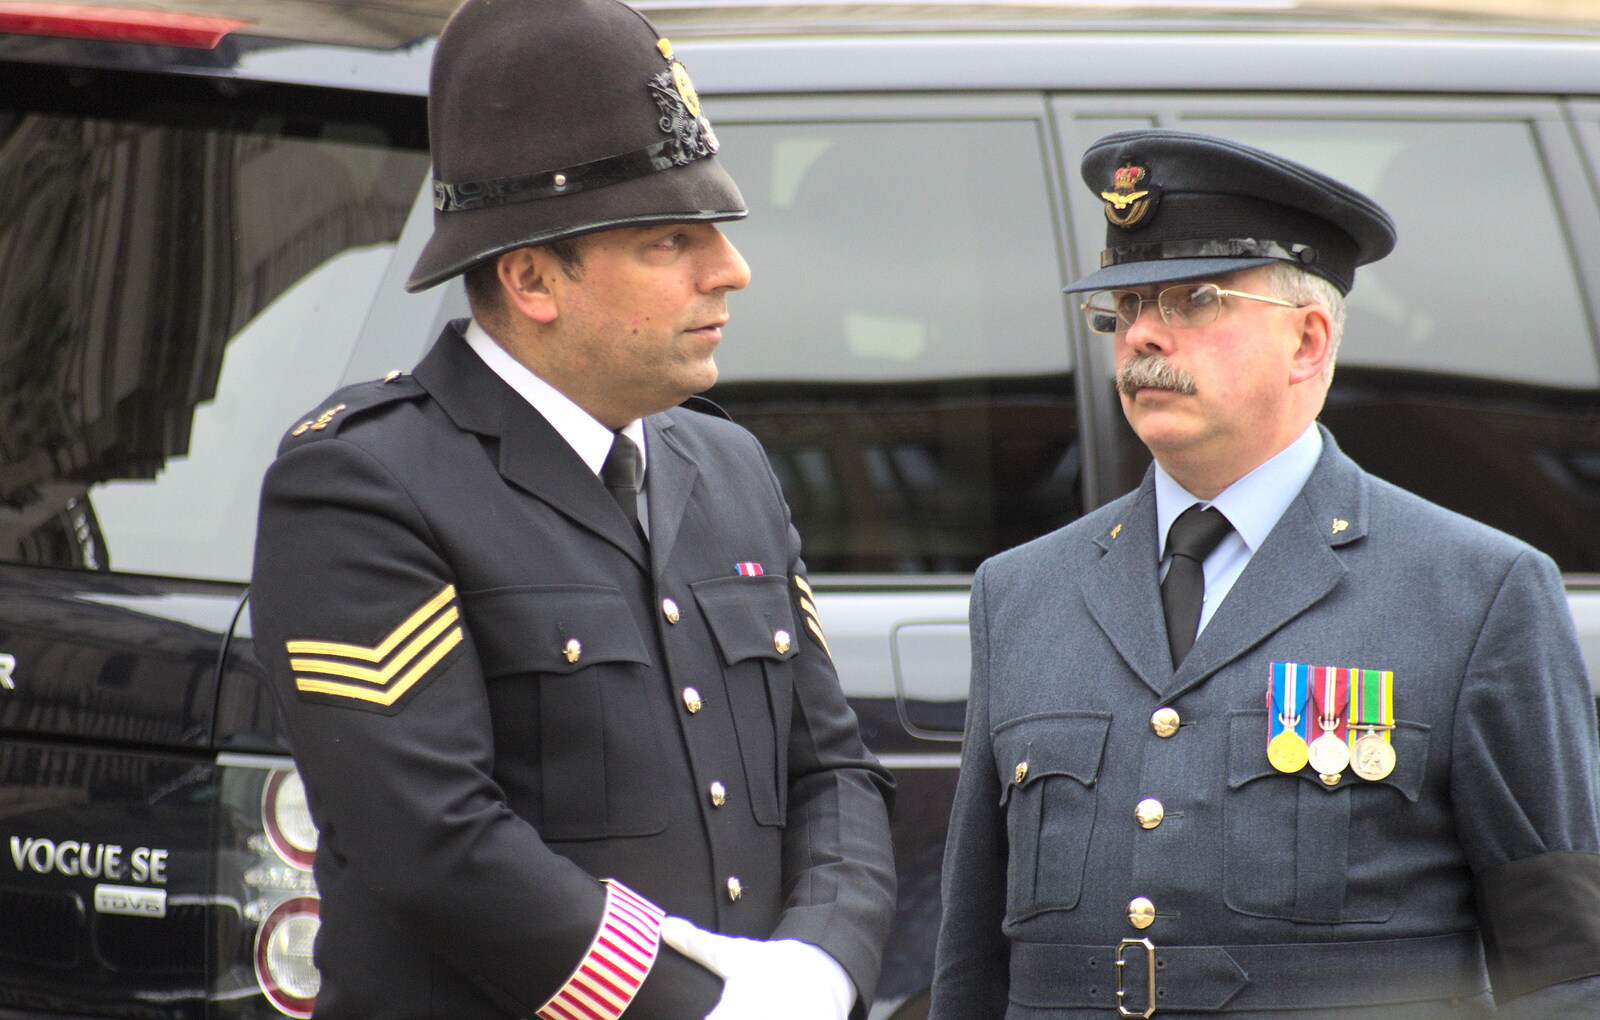 A Met sergeant and an RAF type from Margaret Thatcher's Funeral, St. Paul's, London - 17th April 2013